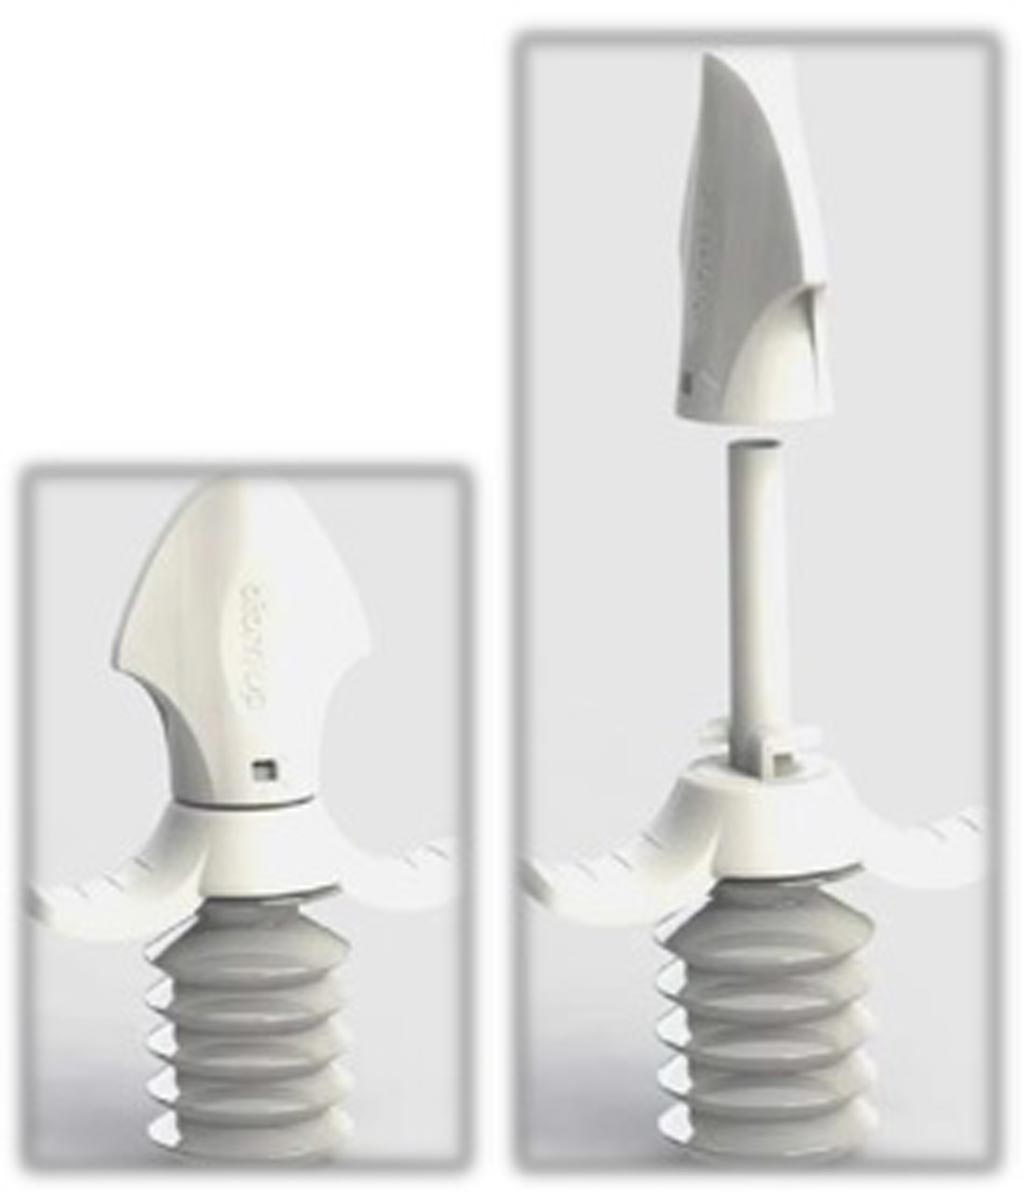 Image: A bellows device helps stop bleeding during surgery (Photo courtesy of Biom’Up).